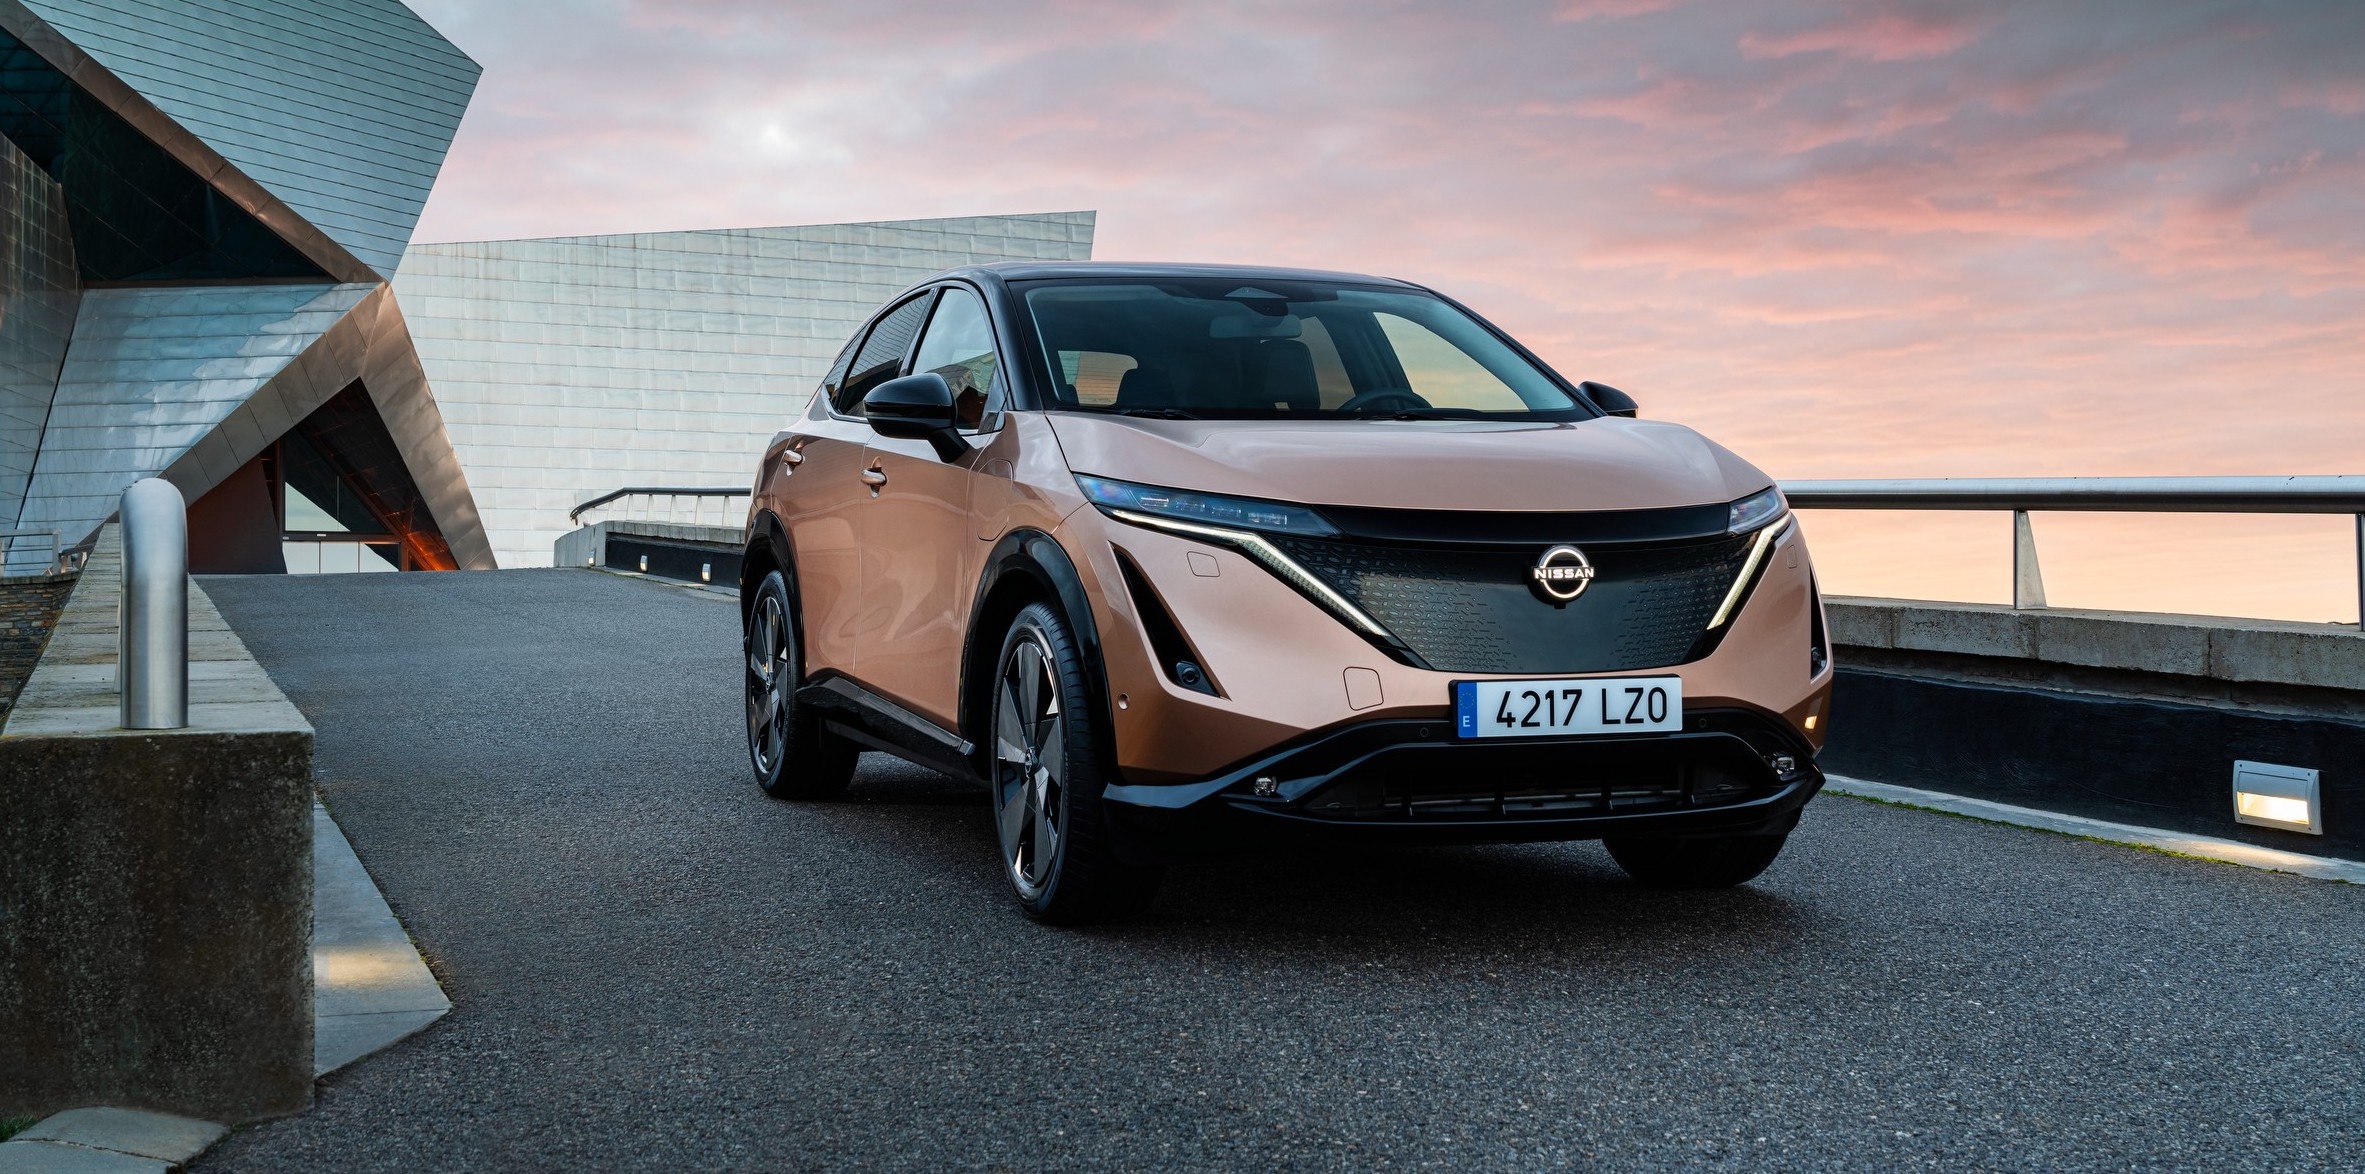 Nissan GB confirms pricing and opens UK pre-orders for the all-electric ARIYA crossover